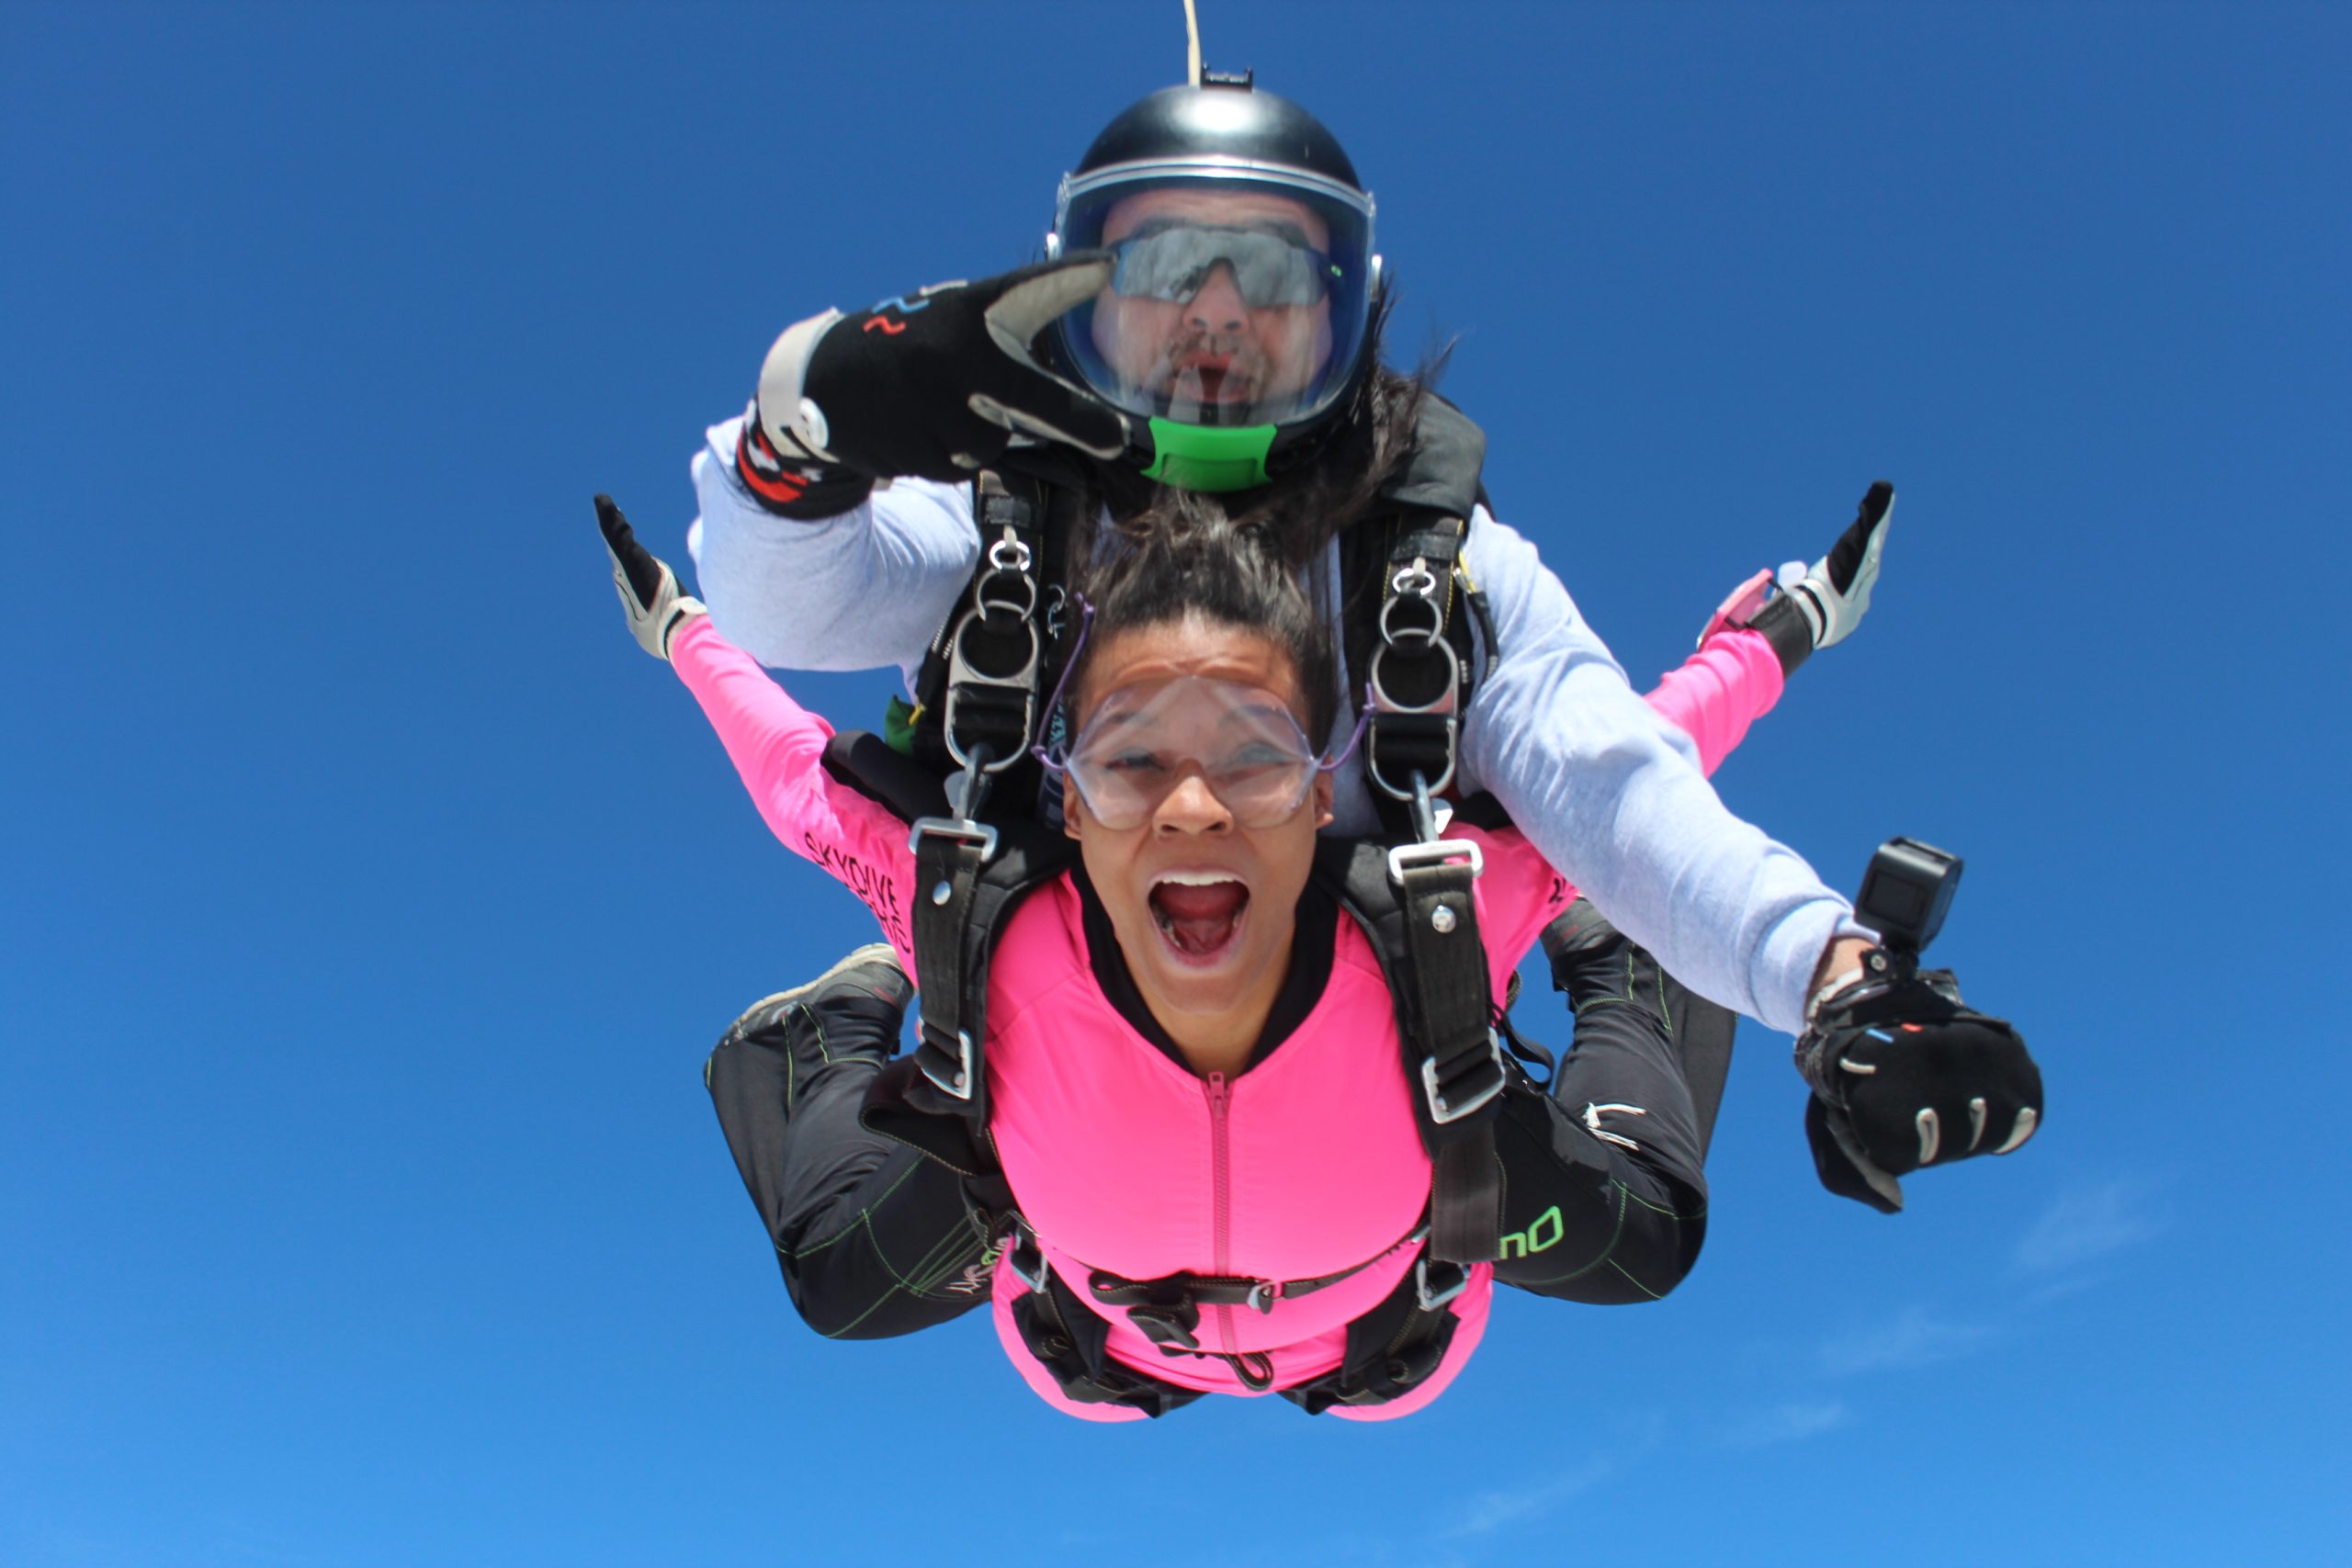 A girl in a pink jumpsuit smiles during free fall on a tandem skydive.